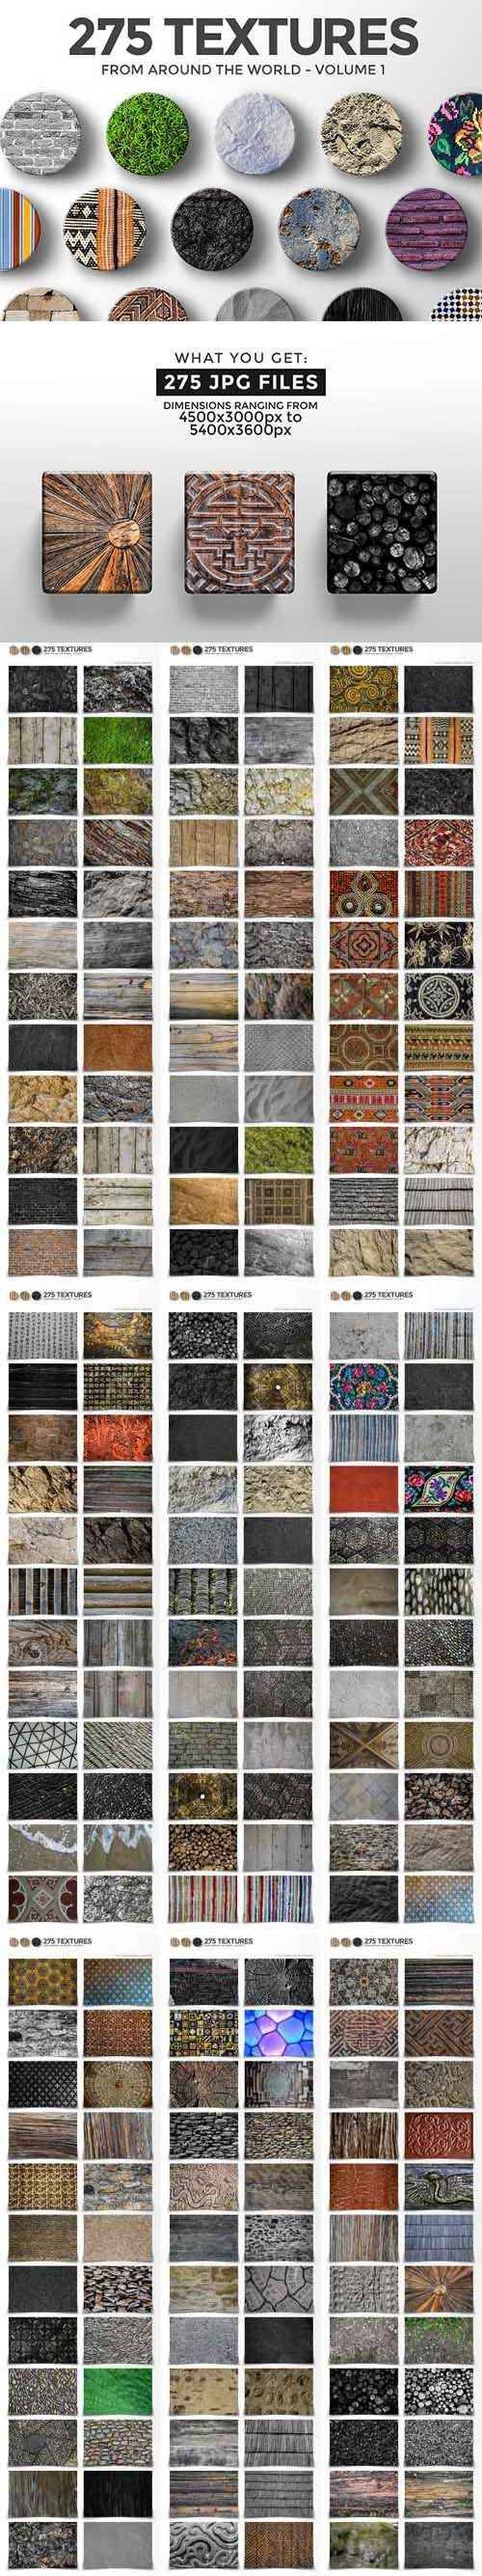 275 Textures From Around the World 1788384